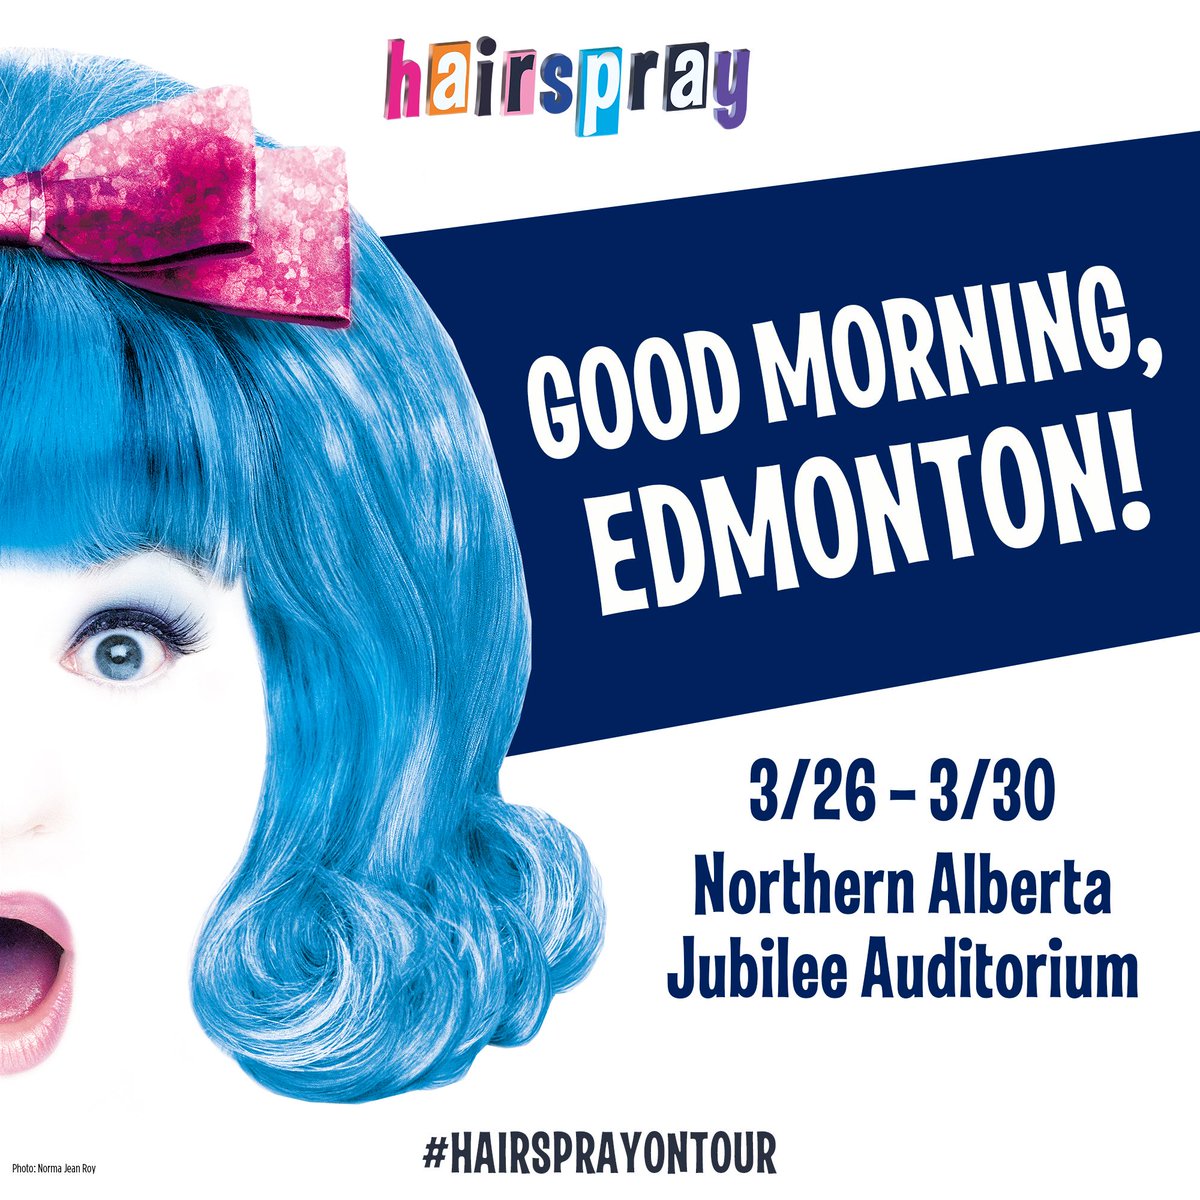 GOOD MORNING, EDMONTON! We're bringing all the big hair and big dreams to your city this week! We can't wait to dance with you!